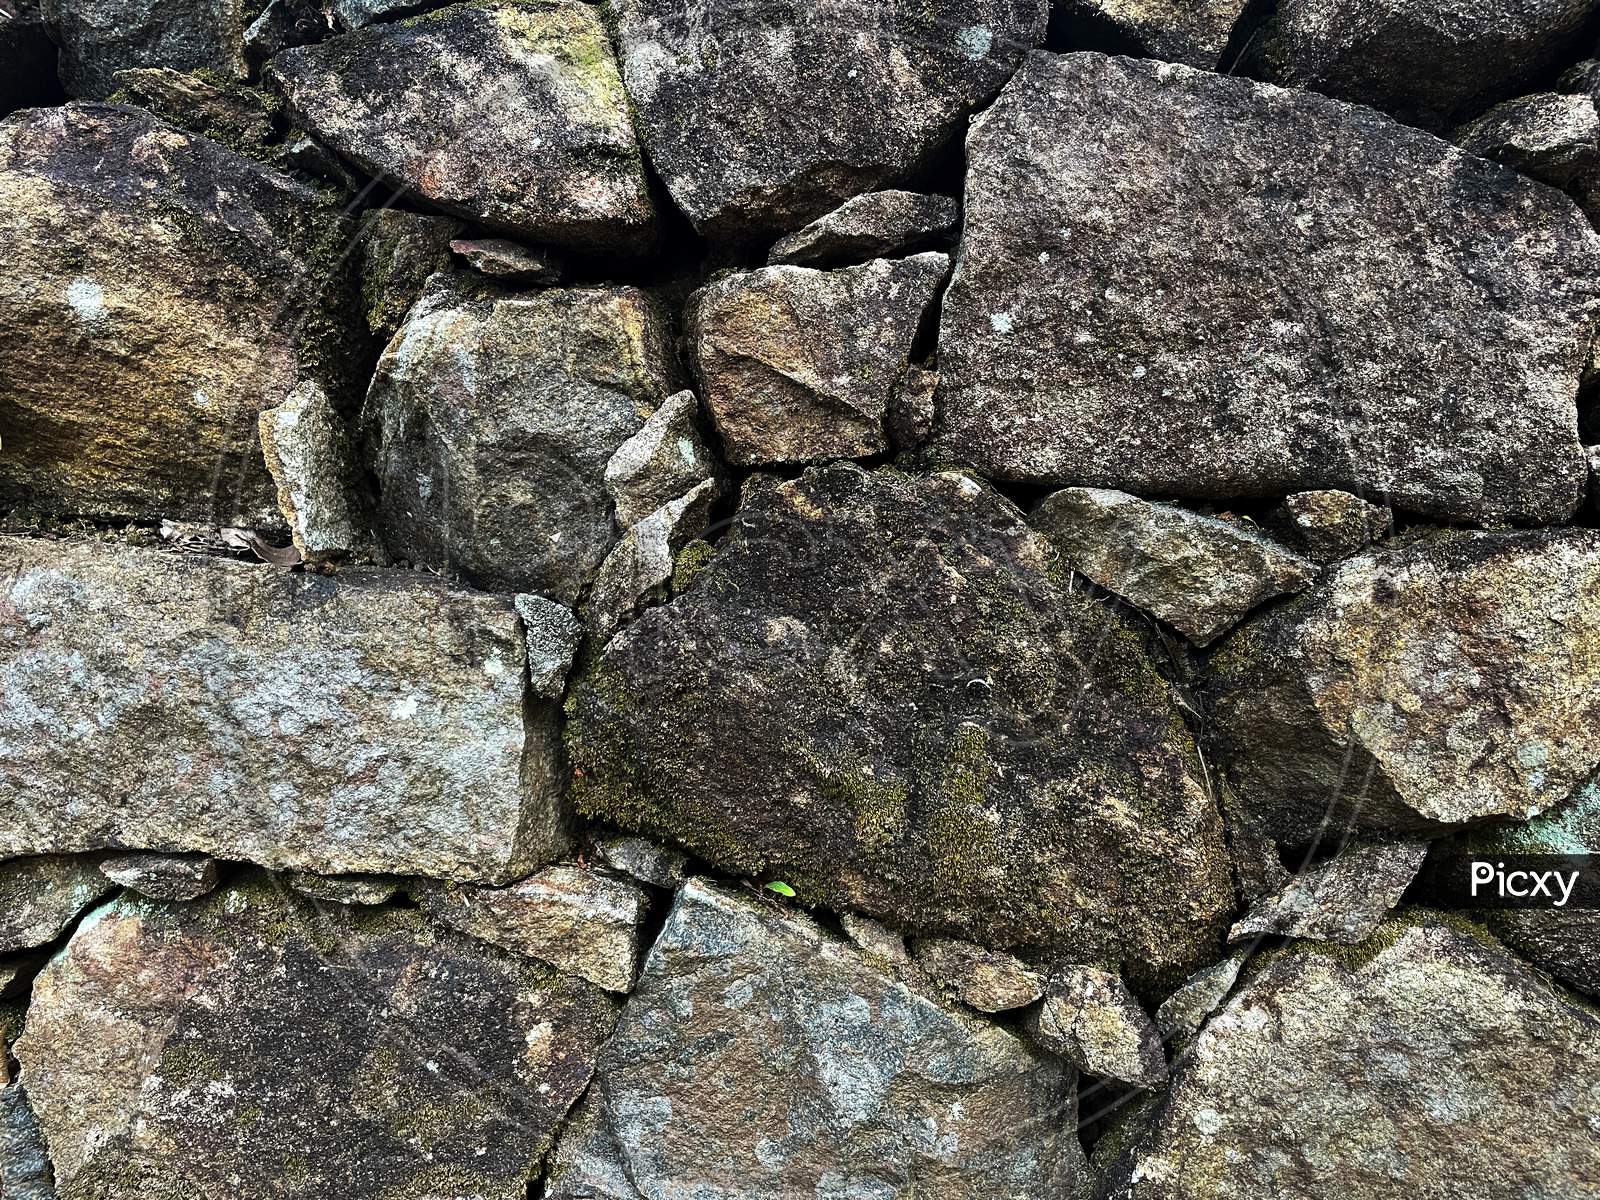 Image Of Dry Rubble Masonry For Construction.